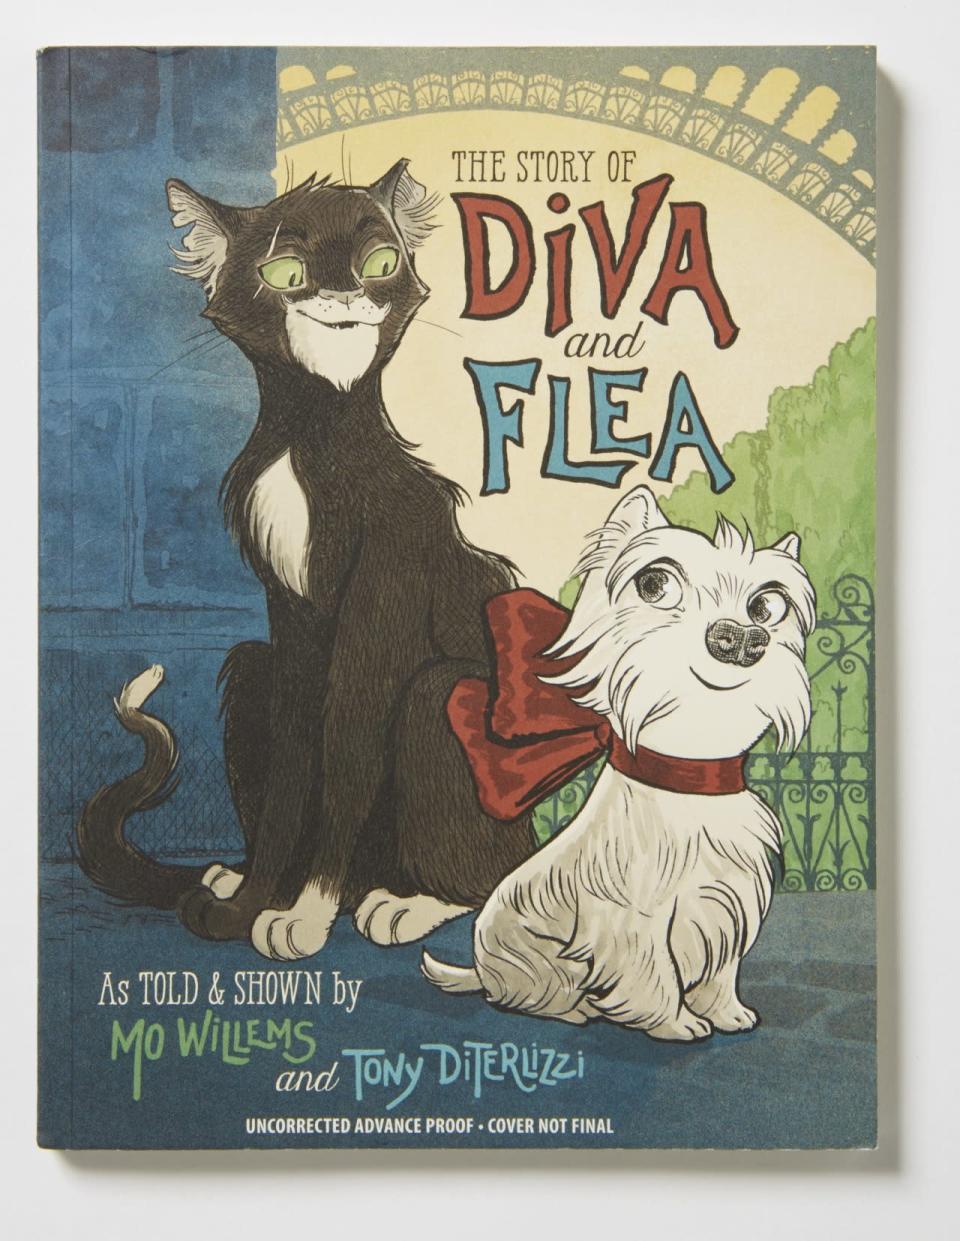 Best Beginning Chapter Book: “The Story of Diva and Flea” by Mo Willems and Tony DiTerlizzi